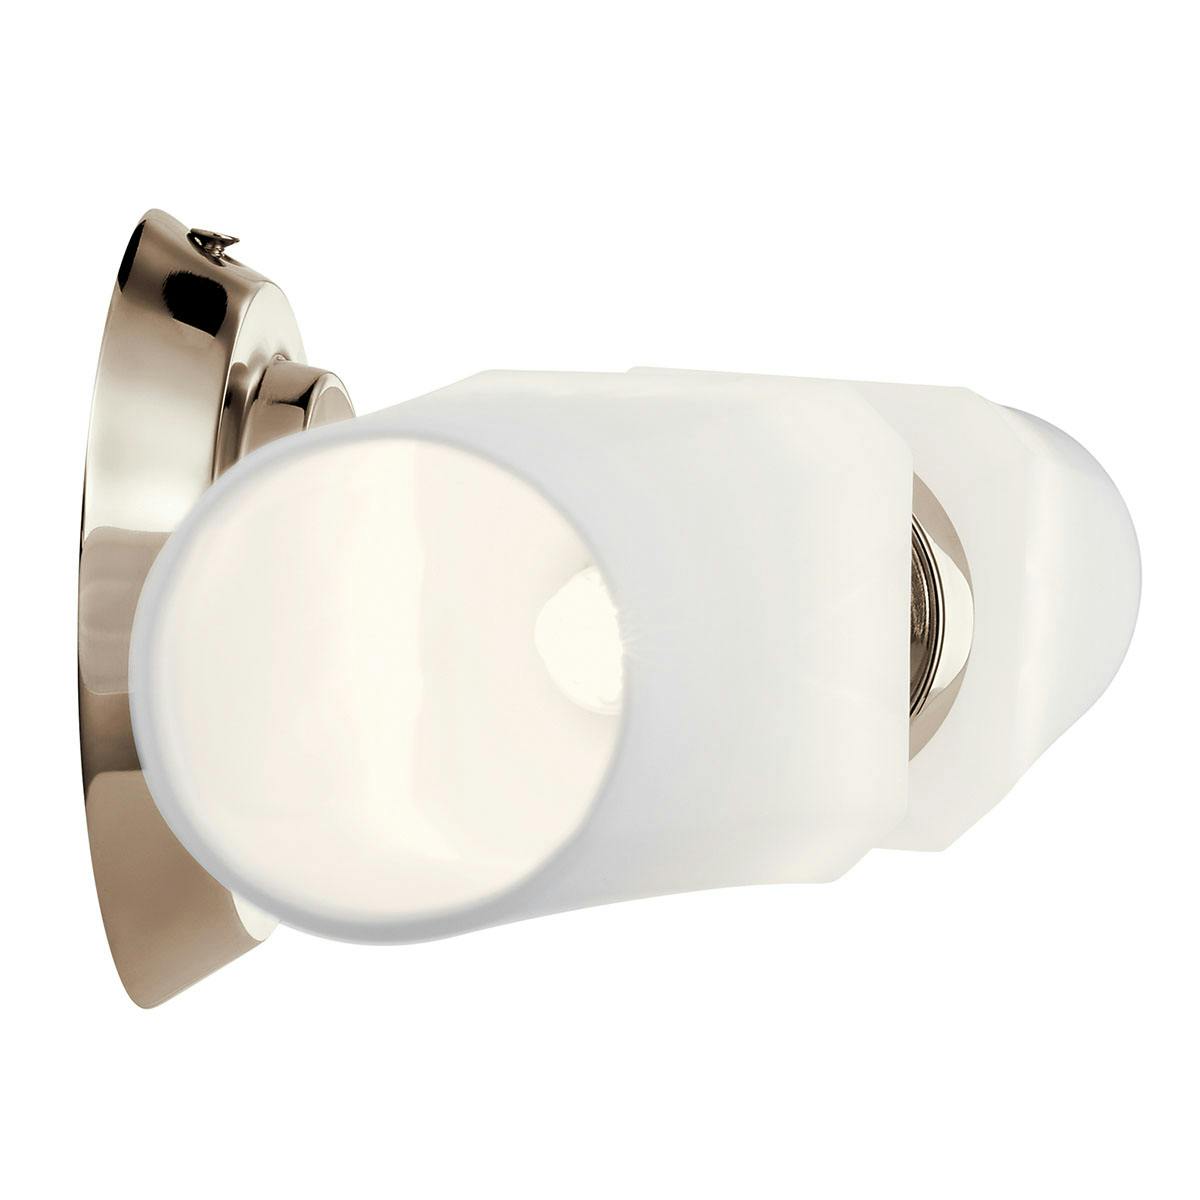 Profile view of the Truby 2 Light Vanity Light Nickel on a white background